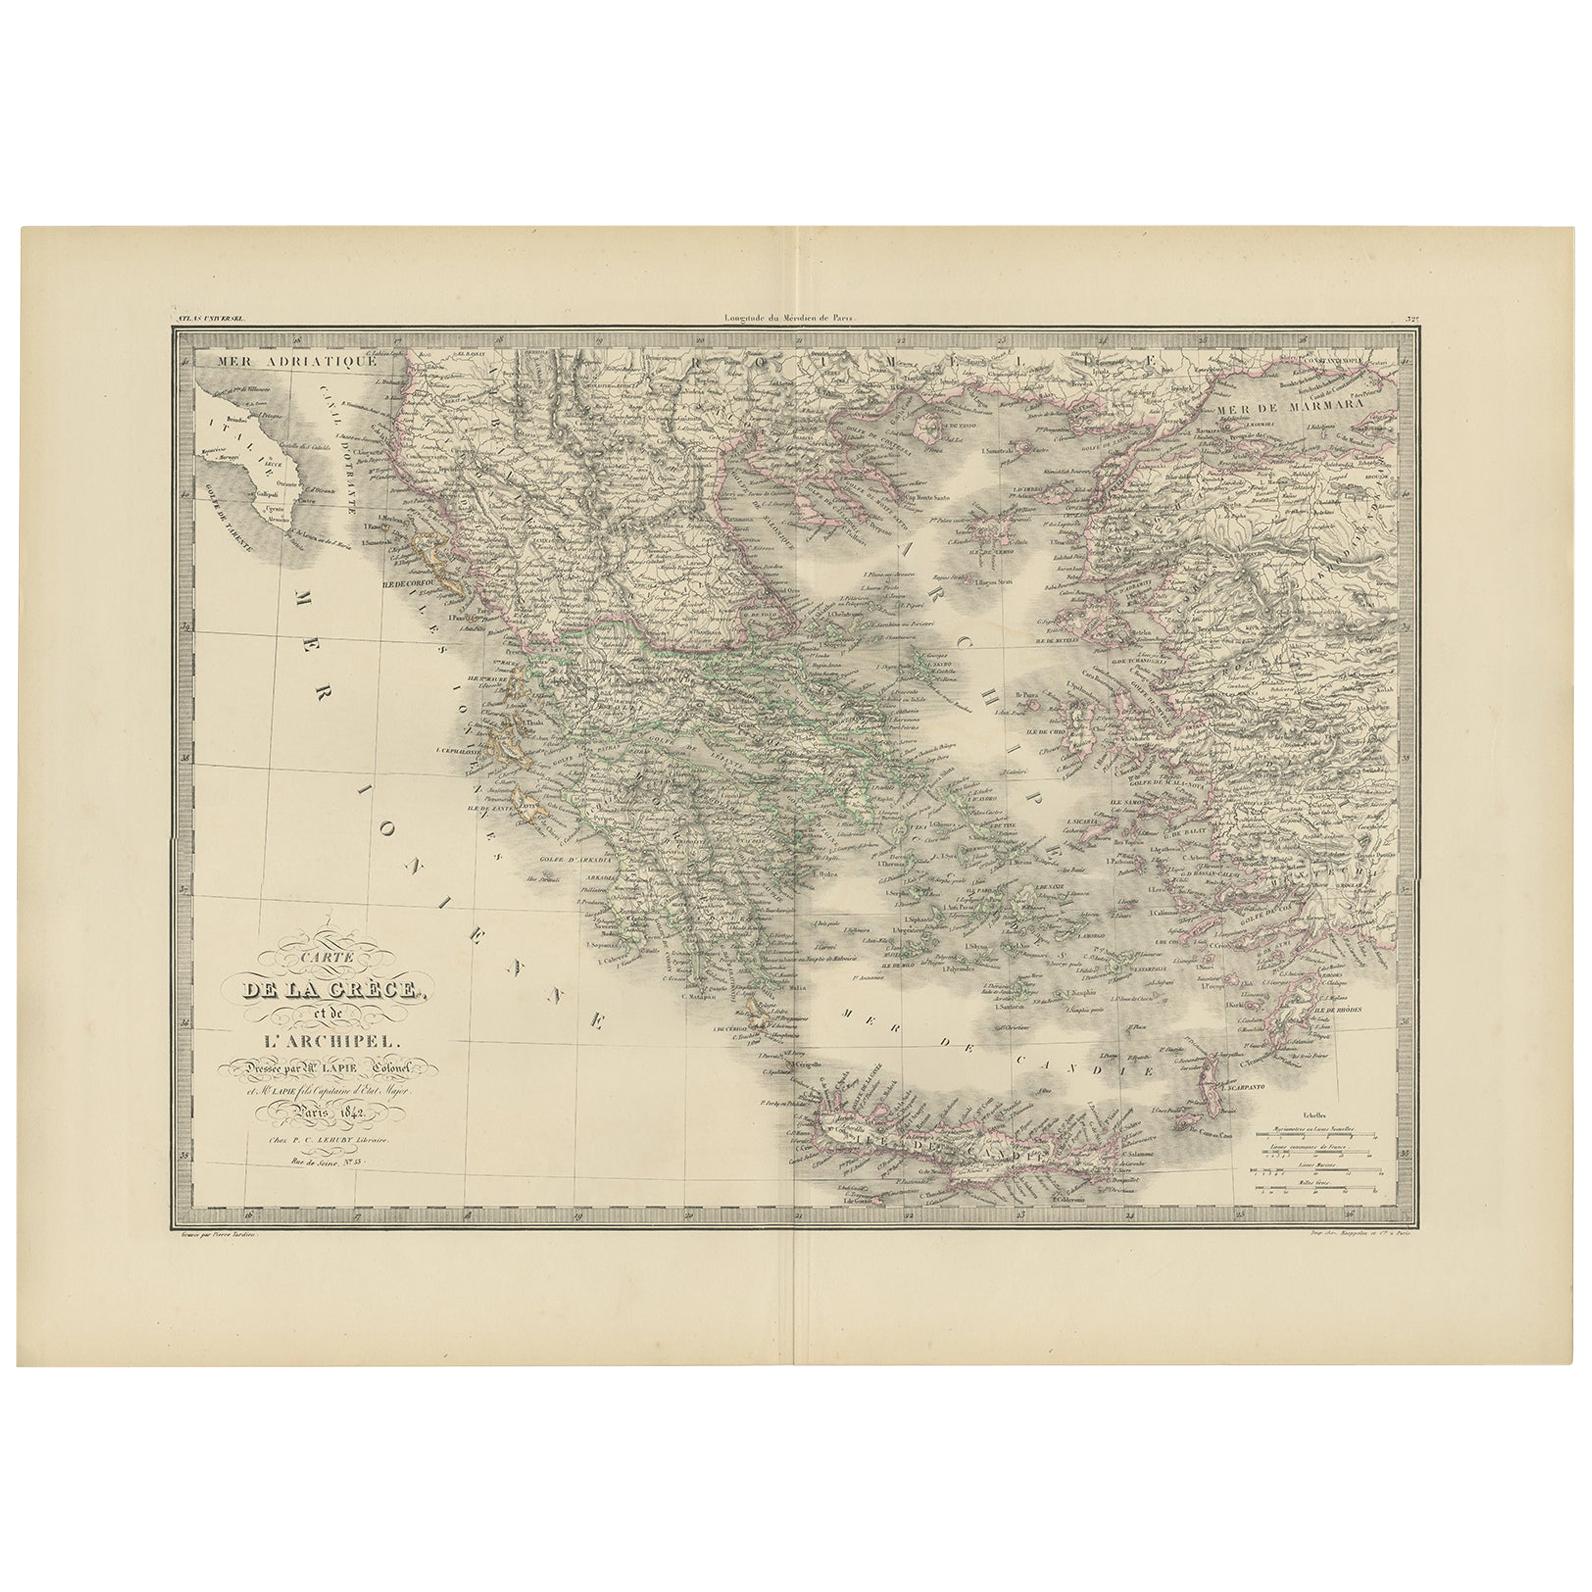 Antique Map of Greece and the Greek islands by Lapie, 1842